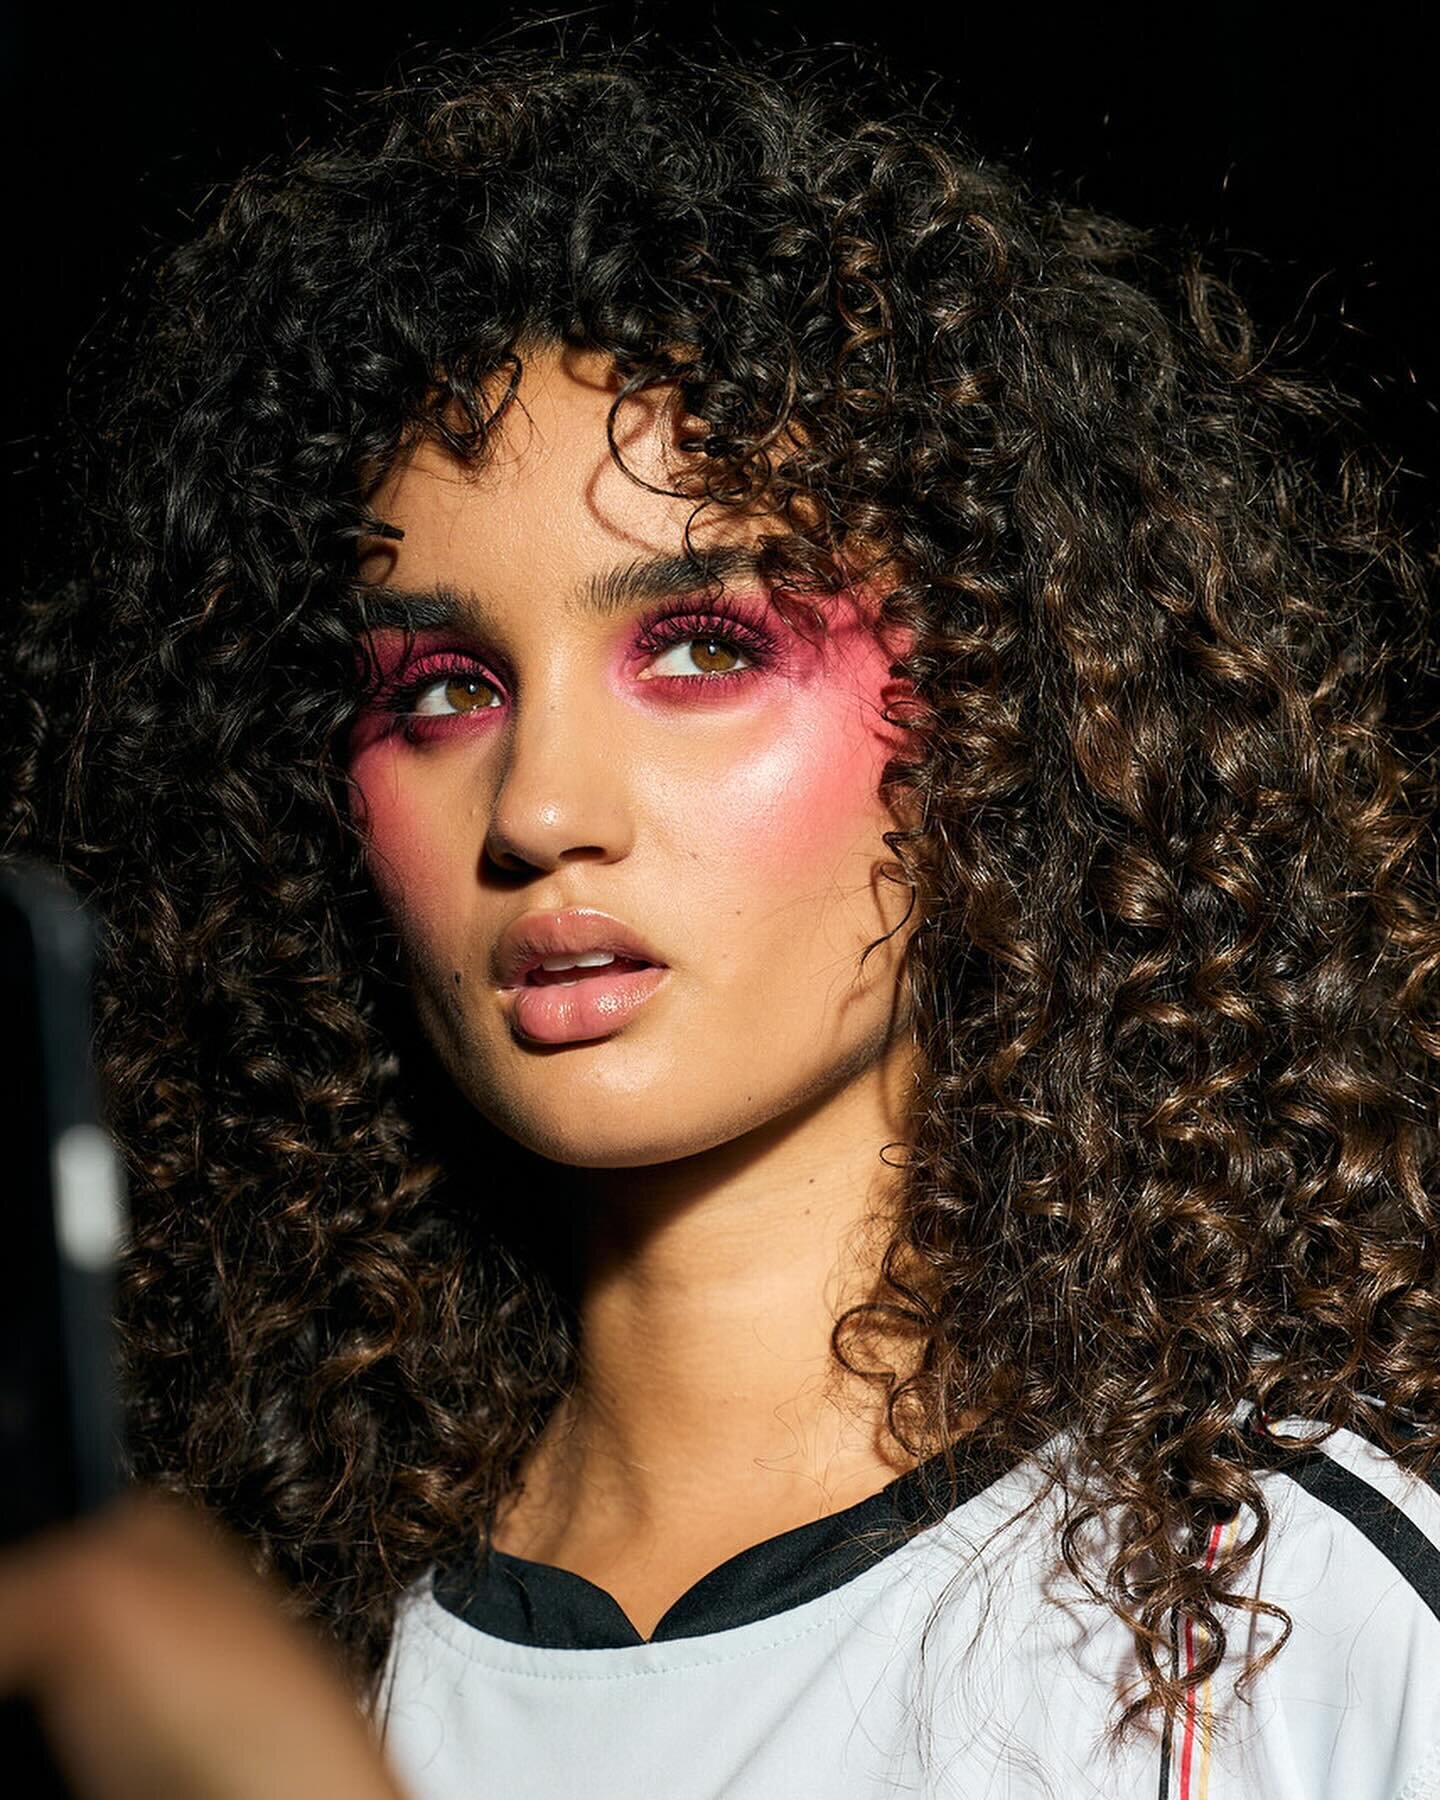 Let&rsquo;s take a look at our favourite runway makeup looks curated by @lancomeofficial, our official beauty partner!

From soft, radiant styles to bold, dynamic shapes and hues, our talented beauty team, led by @larasrokowski , did it all!

Get run